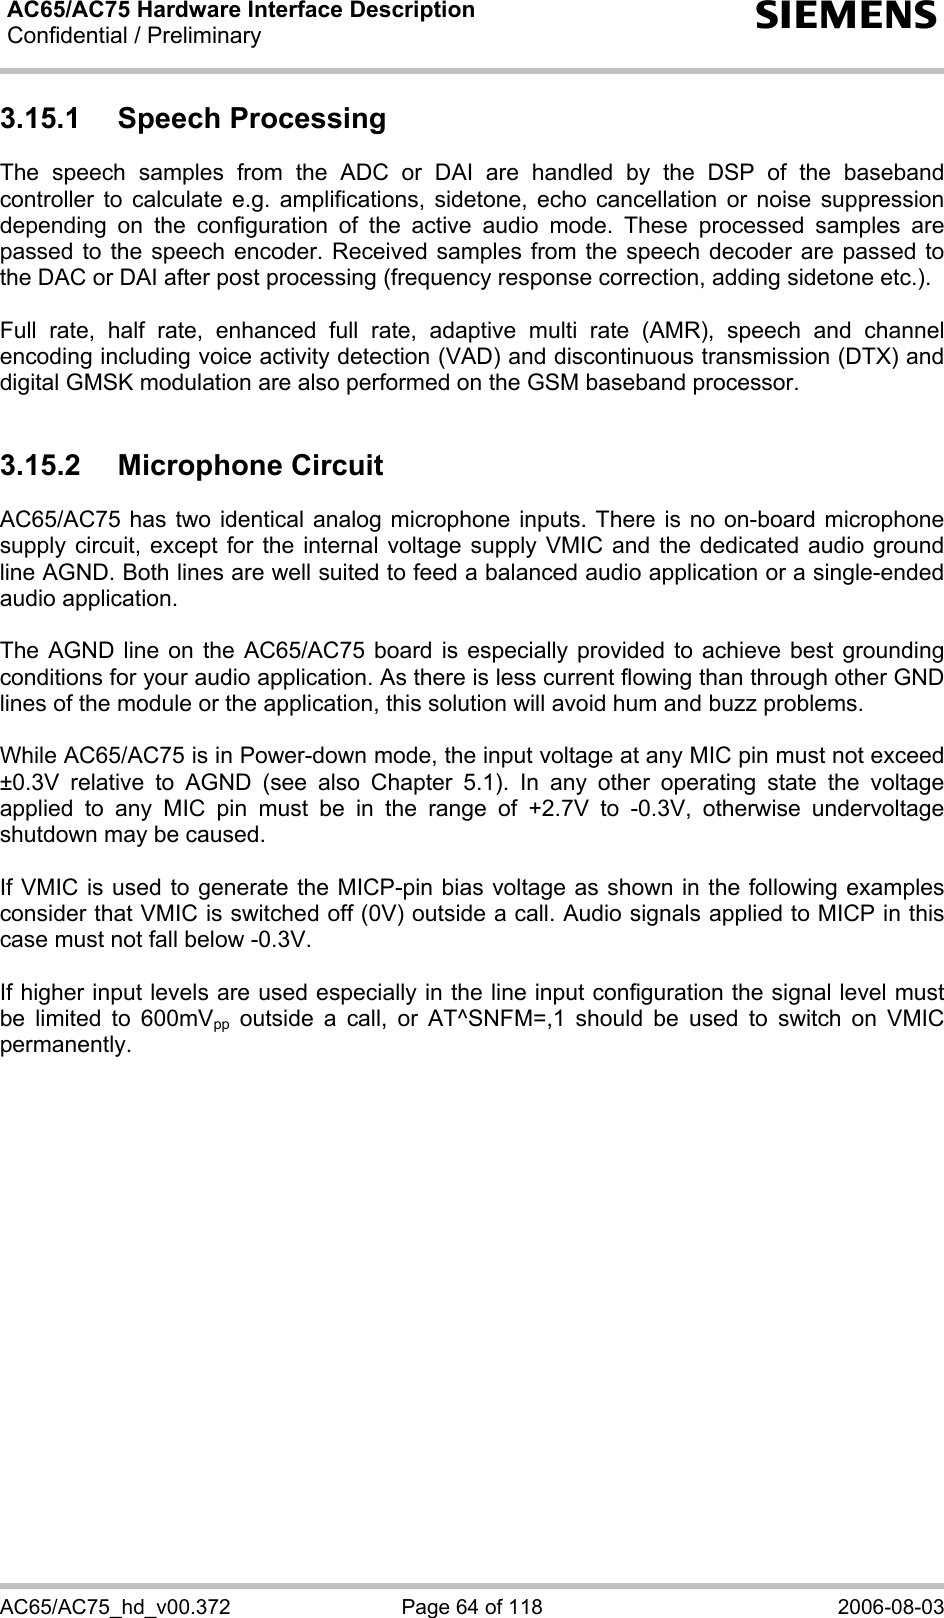 AC65/AC75 Hardware Interface Description Confidential / Preliminary   s AC65/AC75_hd_v00.372  Page 64 of 118  2006-08-03 3.15.1 Speech Processing The speech samples from the ADC or DAI are handled by the DSP of the baseband controller to calculate e.g. amplifications, sidetone, echo cancellation or noise suppression depending on the configuration of the active audio mode. These processed samples are passed to the speech encoder. Received samples from the speech decoder are passed to the DAC or DAI after post processing (frequency response correction, adding sidetone etc.).  Full rate, half rate, enhanced full rate, adaptive multi rate (AMR), speech and channel encoding including voice activity detection (VAD) and discontinuous transmission (DTX) and digital GMSK modulation are also performed on the GSM baseband processor.  3.15.2 Microphone Circuit AC65/AC75 has two identical analog microphone inputs. There is no on-board microphone supply circuit, except for the internal voltage supply VMIC and the dedicated audio ground line AGND. Both lines are well suited to feed a balanced audio application or a single-ended audio application.   The AGND line on the AC65/AC75 board is especially provided to achieve best grounding conditions for your audio application. As there is less current flowing than through other GND lines of the module or the application, this solution will avoid hum and buzz problems.   While AC65/AC75 is in Power-down mode, the input voltage at any MIC pin must not exceed ±0.3V relative to AGND (see also Chapter 5.1). In any other operating state the voltage applied to any MIC pin must be in the range of +2.7V to -0.3V, otherwise undervoltage shutdown may be caused.  If VMIC is used to generate the MICP-pin bias voltage as shown in the following examples consider that VMIC is switched off (0V) outside a call. Audio signals applied to MICP in this case must not fall below -0.3V.   If higher input levels are used especially in the line input configuration the signal level must be limited to 600mVpp outside a call, or AT^SNFM=,1 should be used to switch on VMIC permanently.    